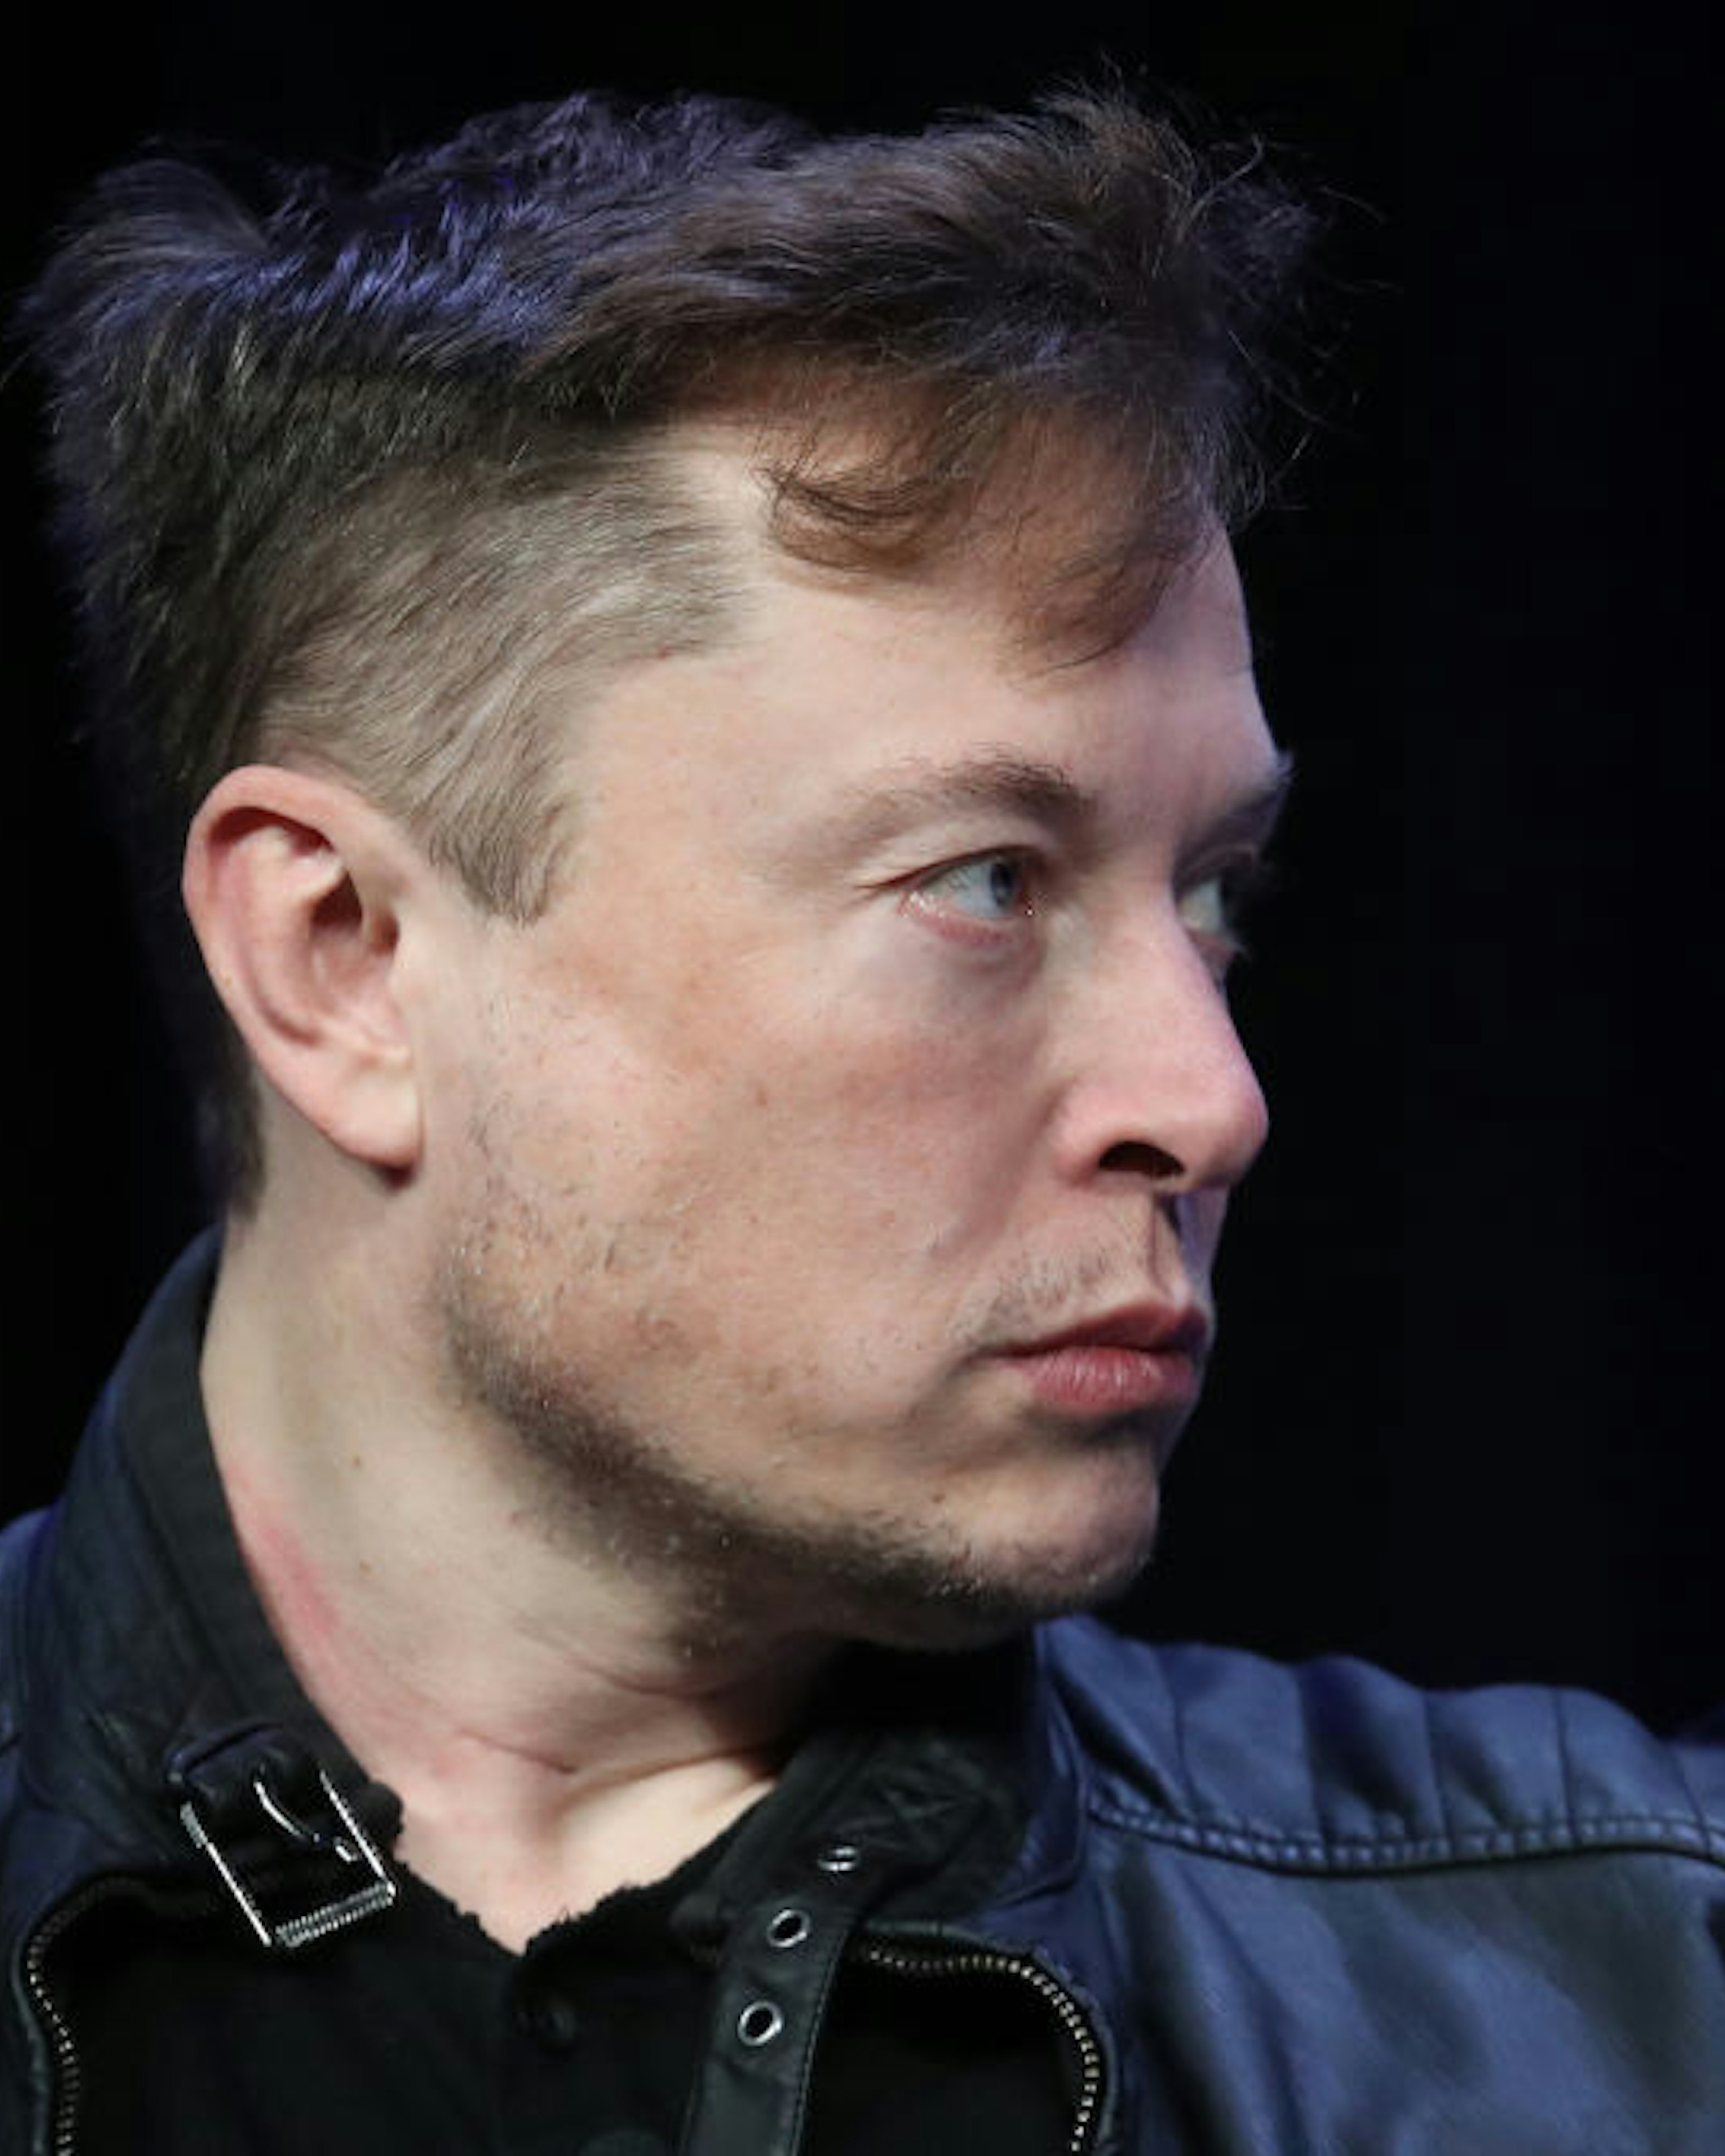 WASHINGTON, DC - MARCH 09: Elon Musk, founder and chief engineer of SpaceX speaks at the 2020 Satellite Conference and Exhibition March 9, 2020 in Washington, DC. Musk answered a range of questions relating to SpaceX projects during his appearance at the conference. (Photo by Win McNamee/Getty Images)